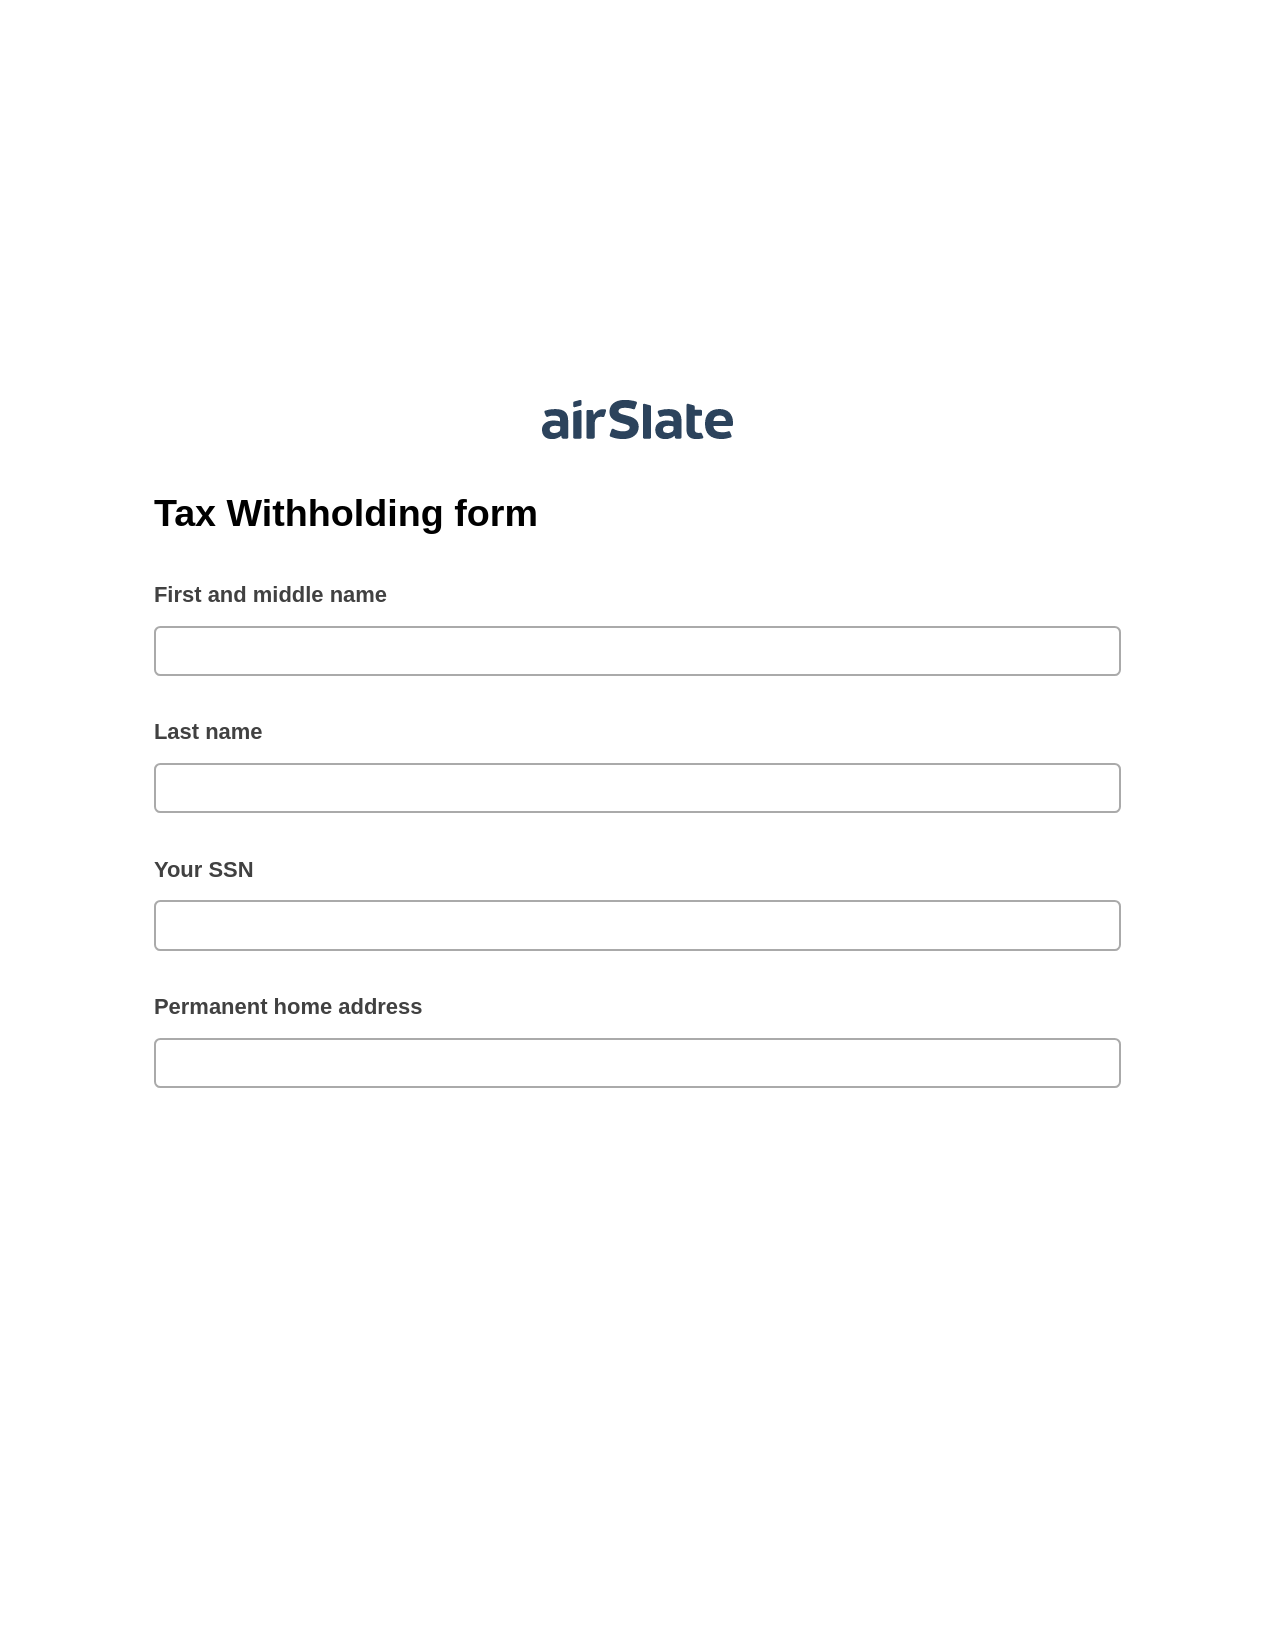 Multirole Tax Withholding form Pre-fill from NetSuite Records Bot, Invoke Salesforce Process Bot, Post-finish Document Bot